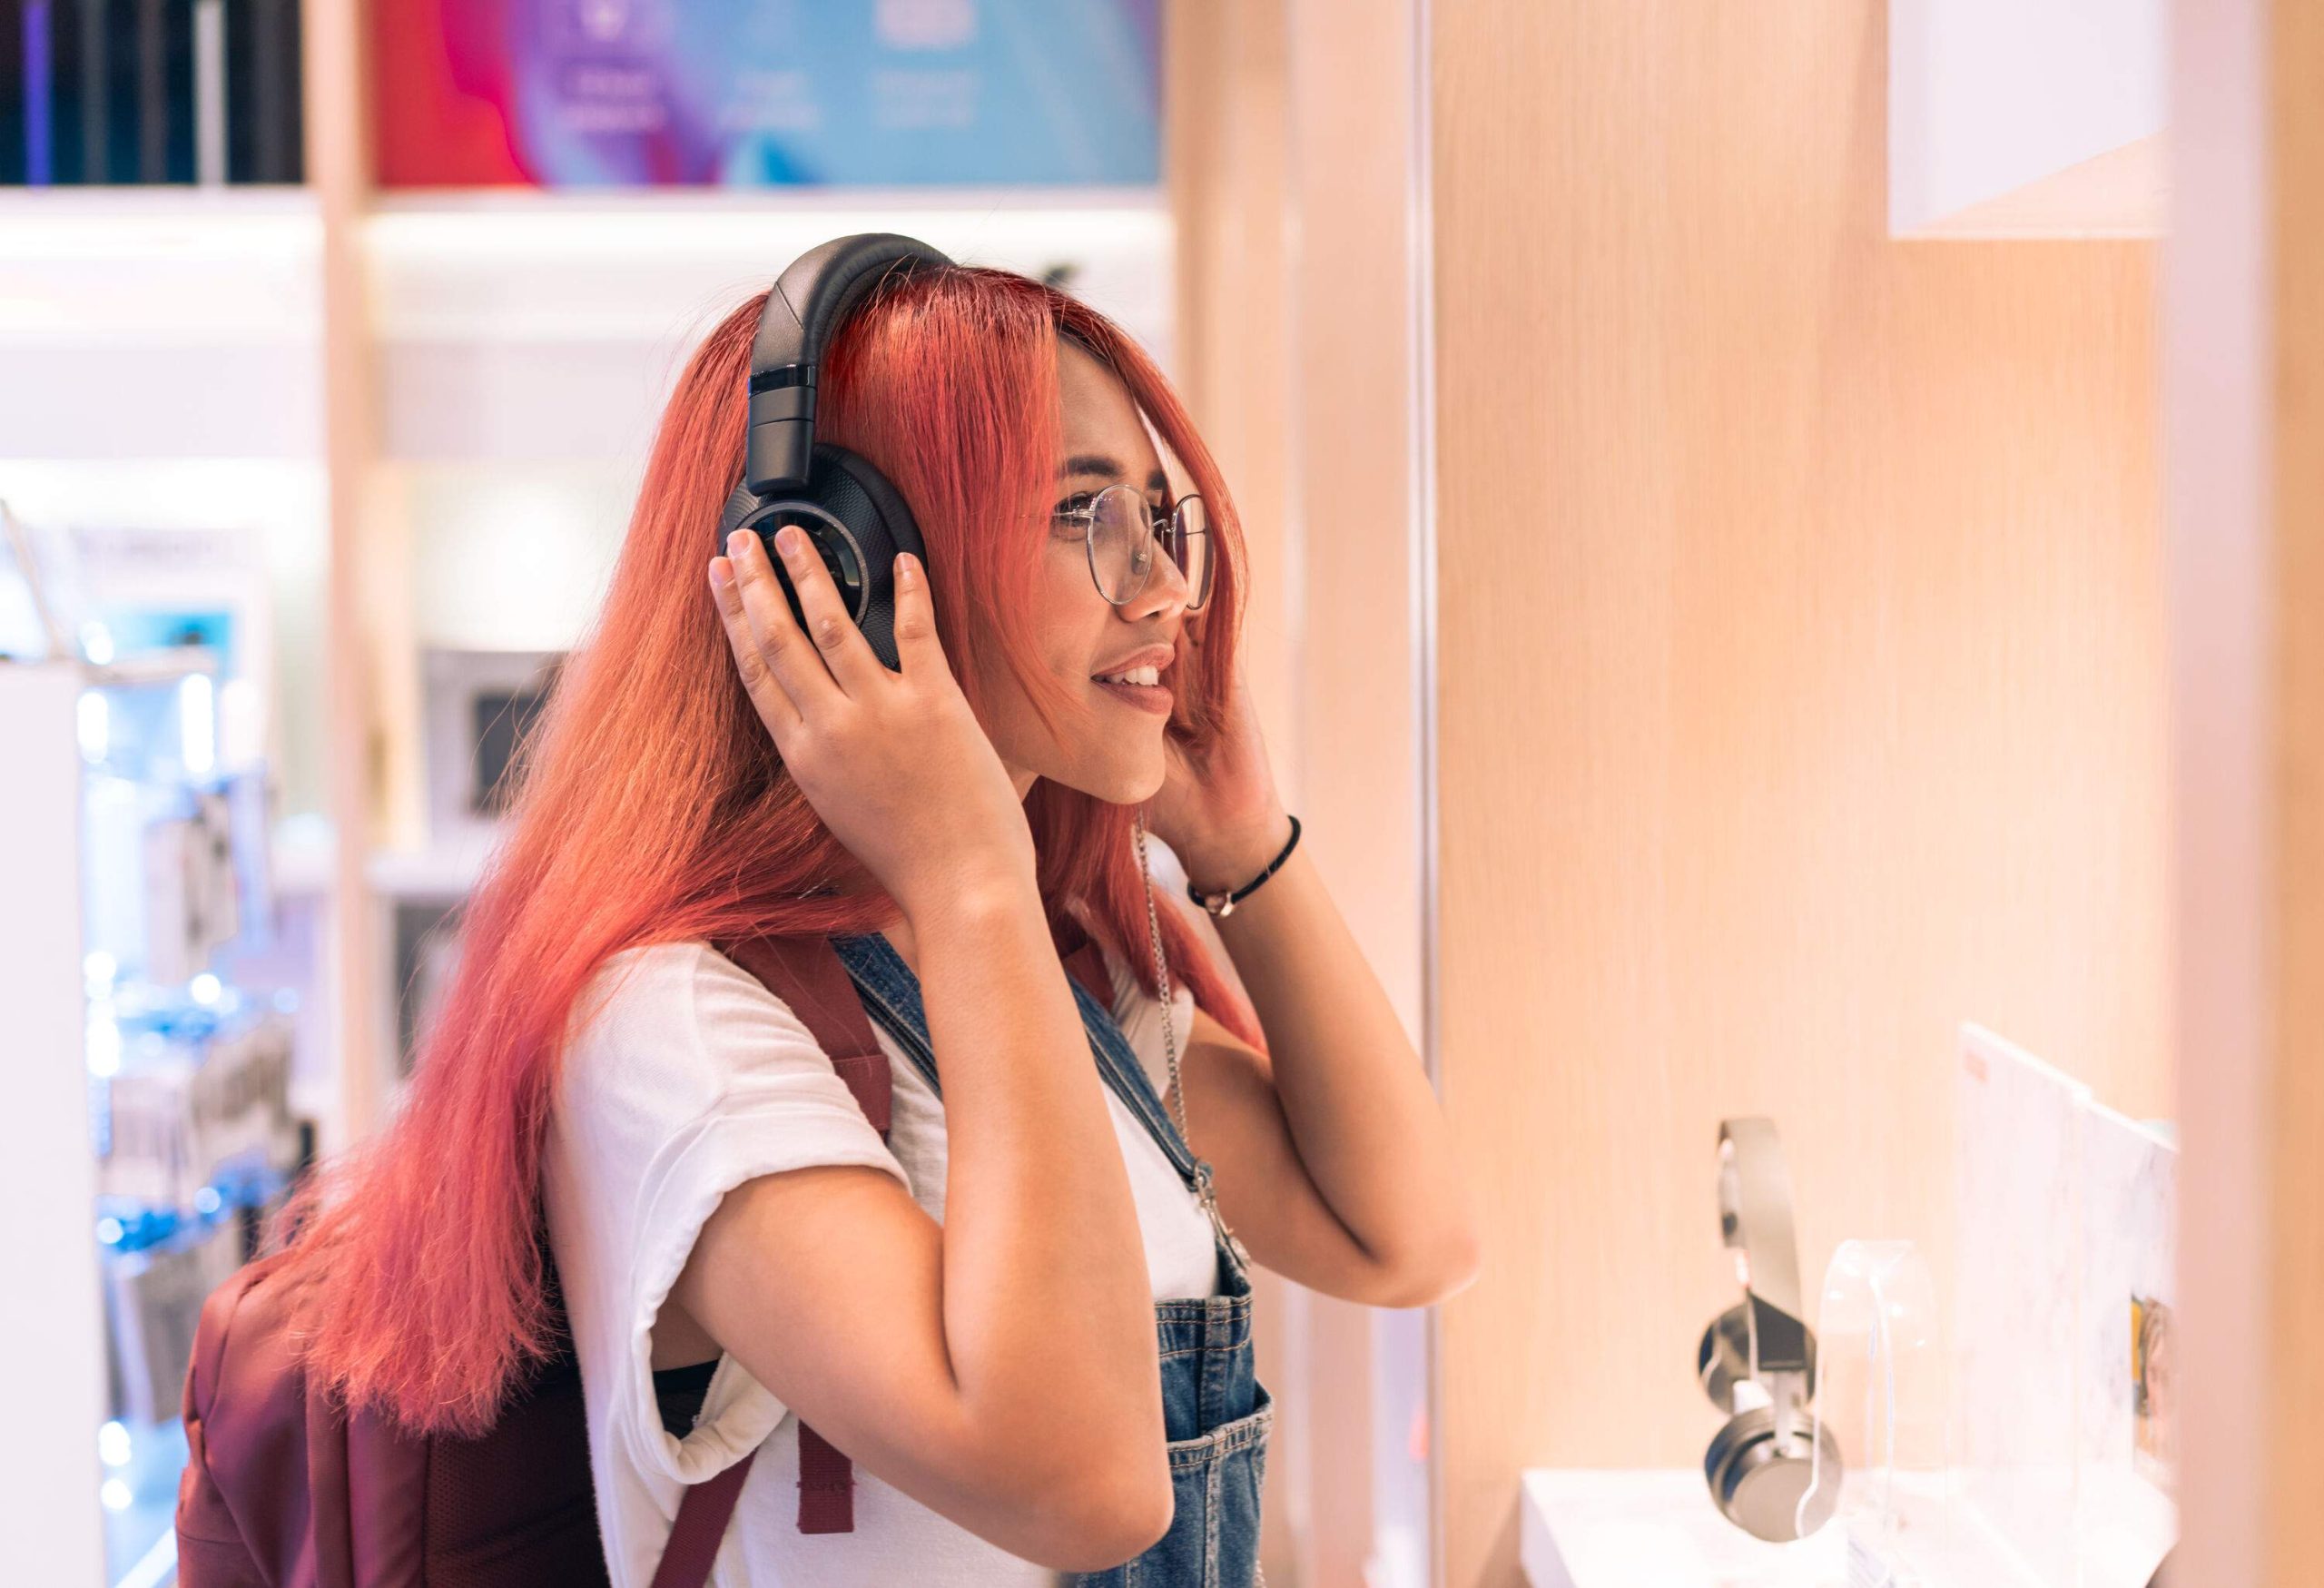 A happy female with long reddish hair trying on a headphone.